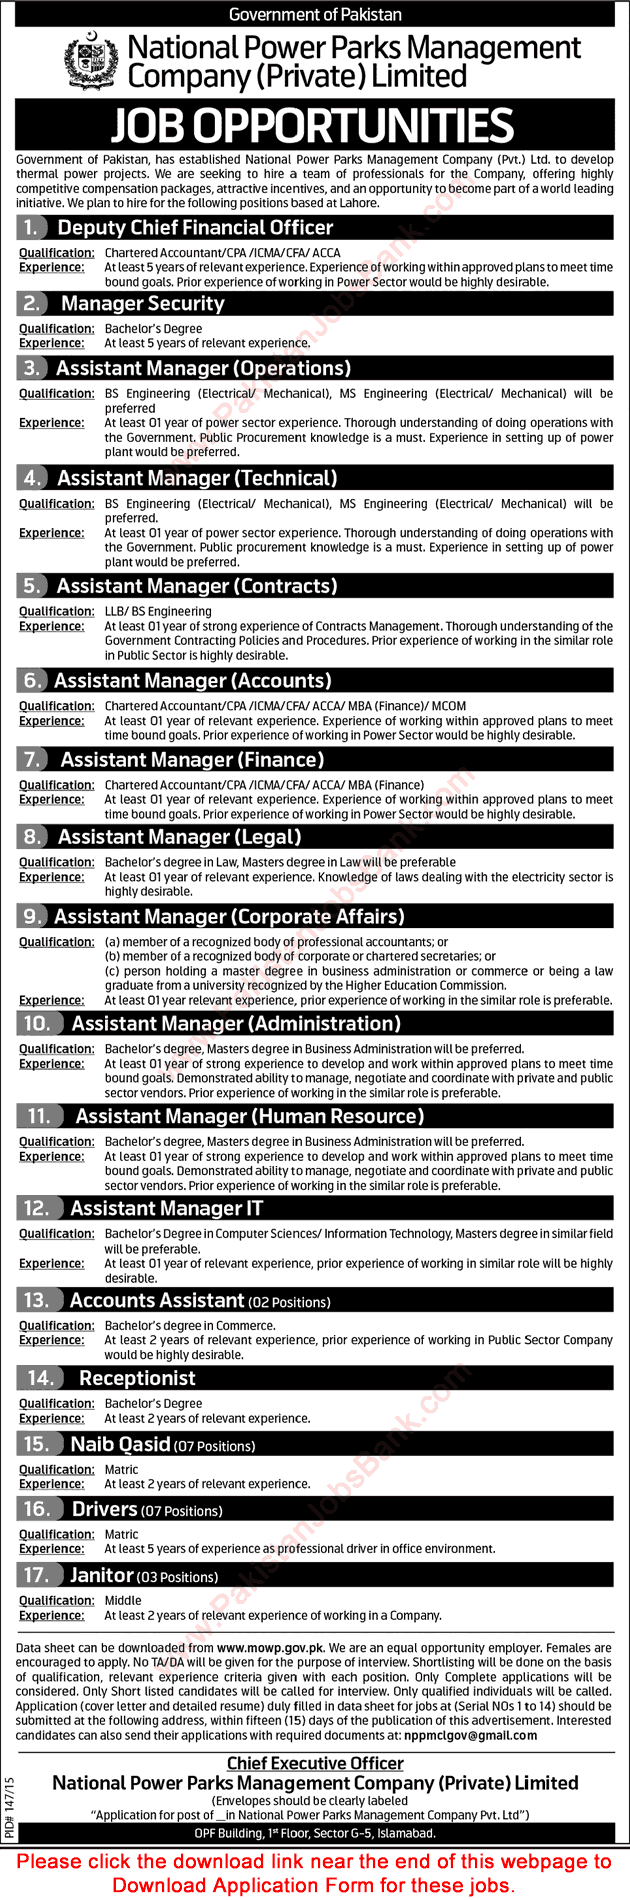 National Power Parks Management Company Limited Jobs 2015 July Lahore Application Form Download NPPMCL Latest